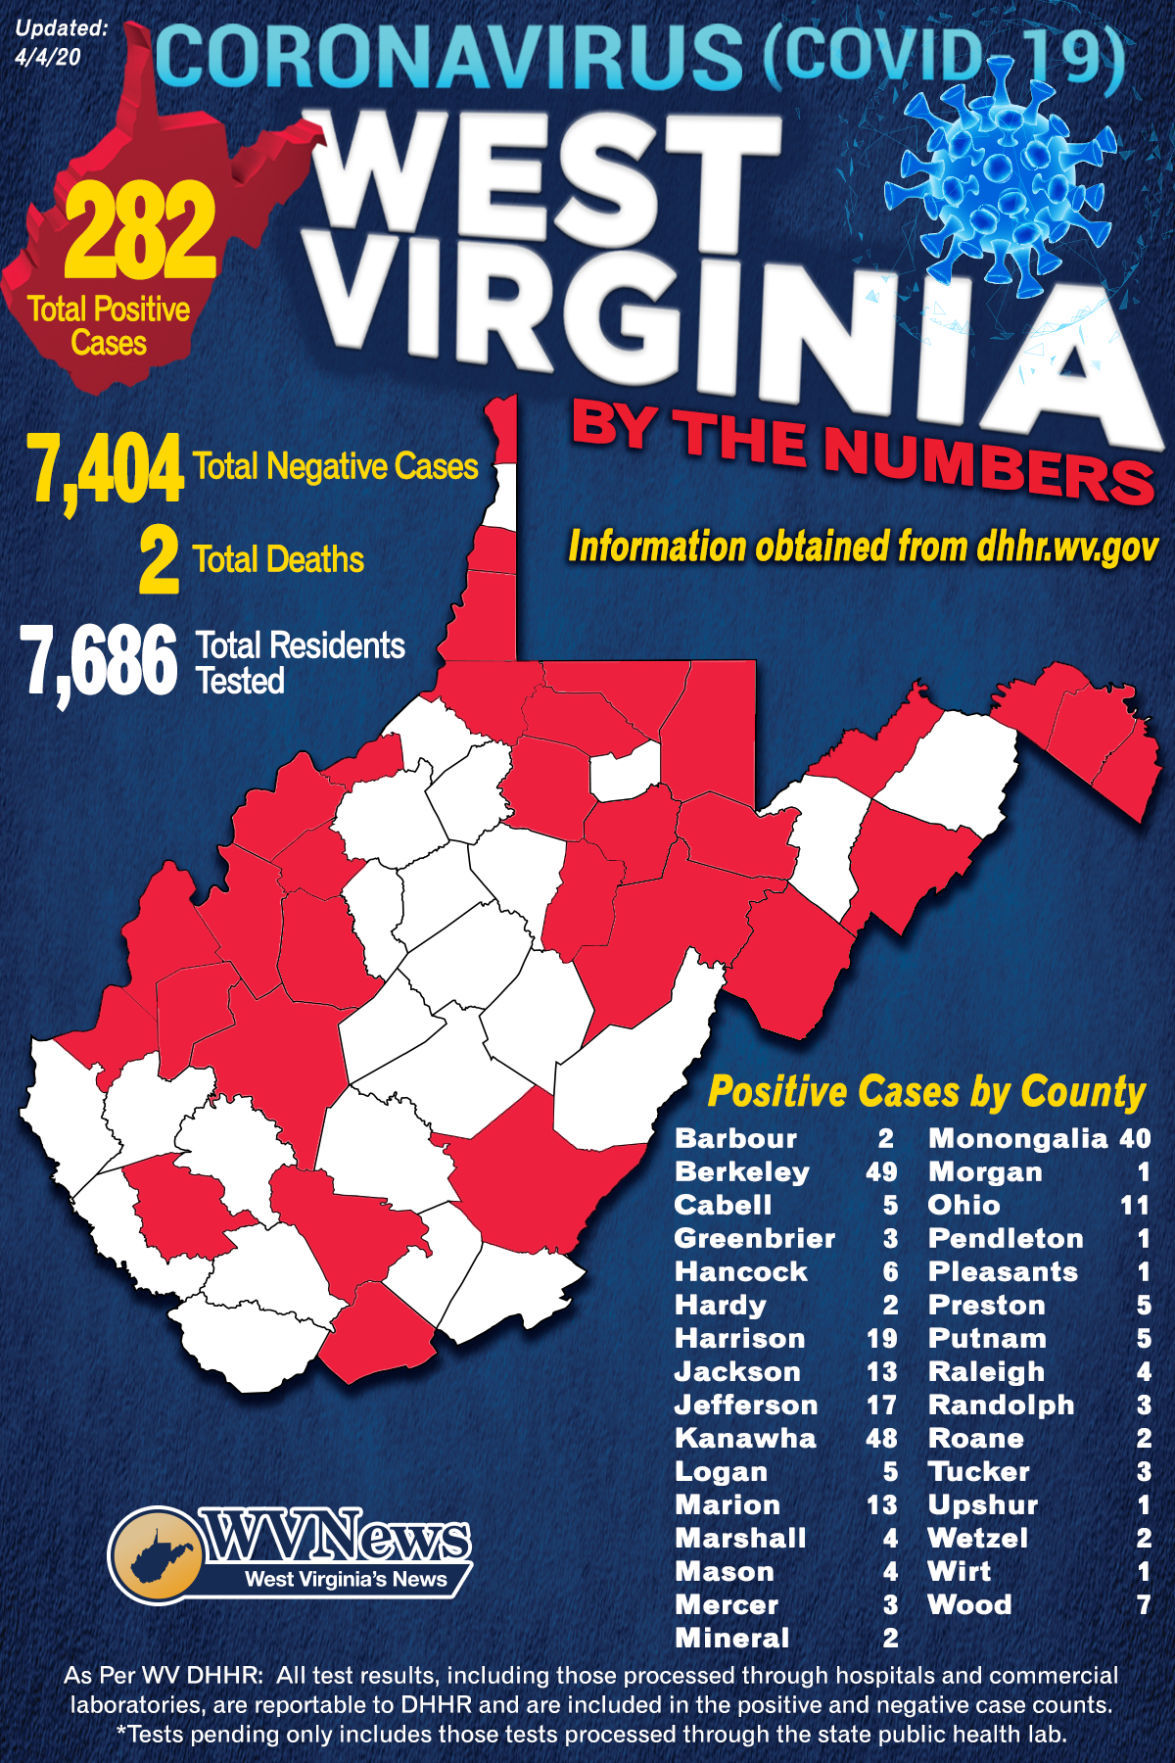 Wv S Covid 19 Positive Cases Increase By 45 To 2 Eastern Panhandle Remains Hot Spot Wv News Wvnews Com